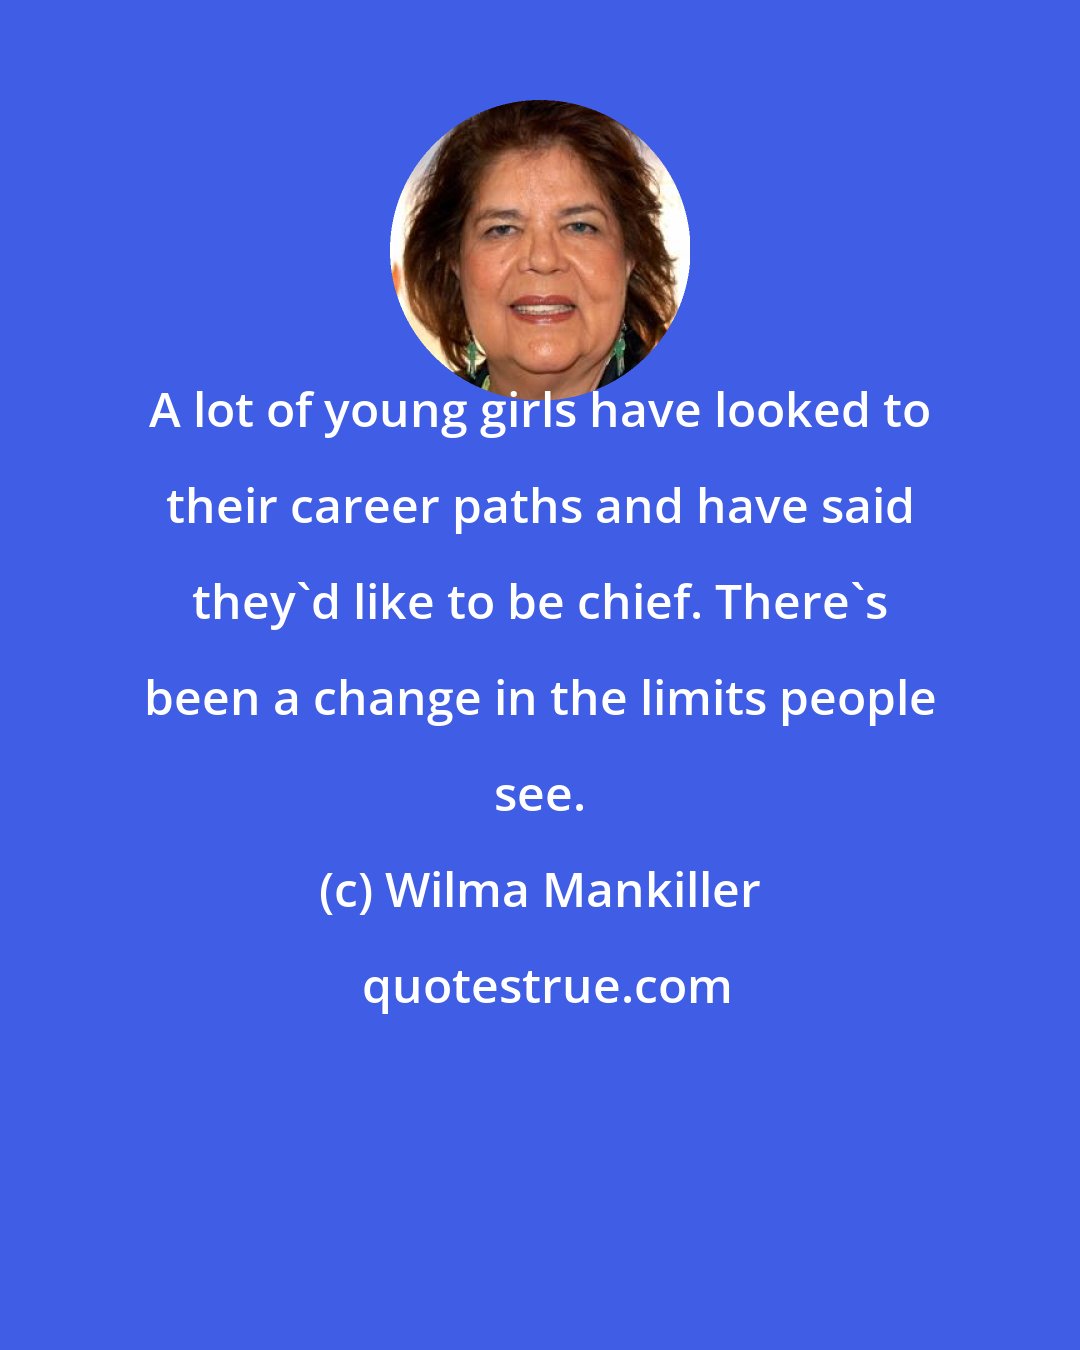 Wilma Mankiller: A lot of young girls have looked to their career paths and have said they'd like to be chief. There's been a change in the limits people see.